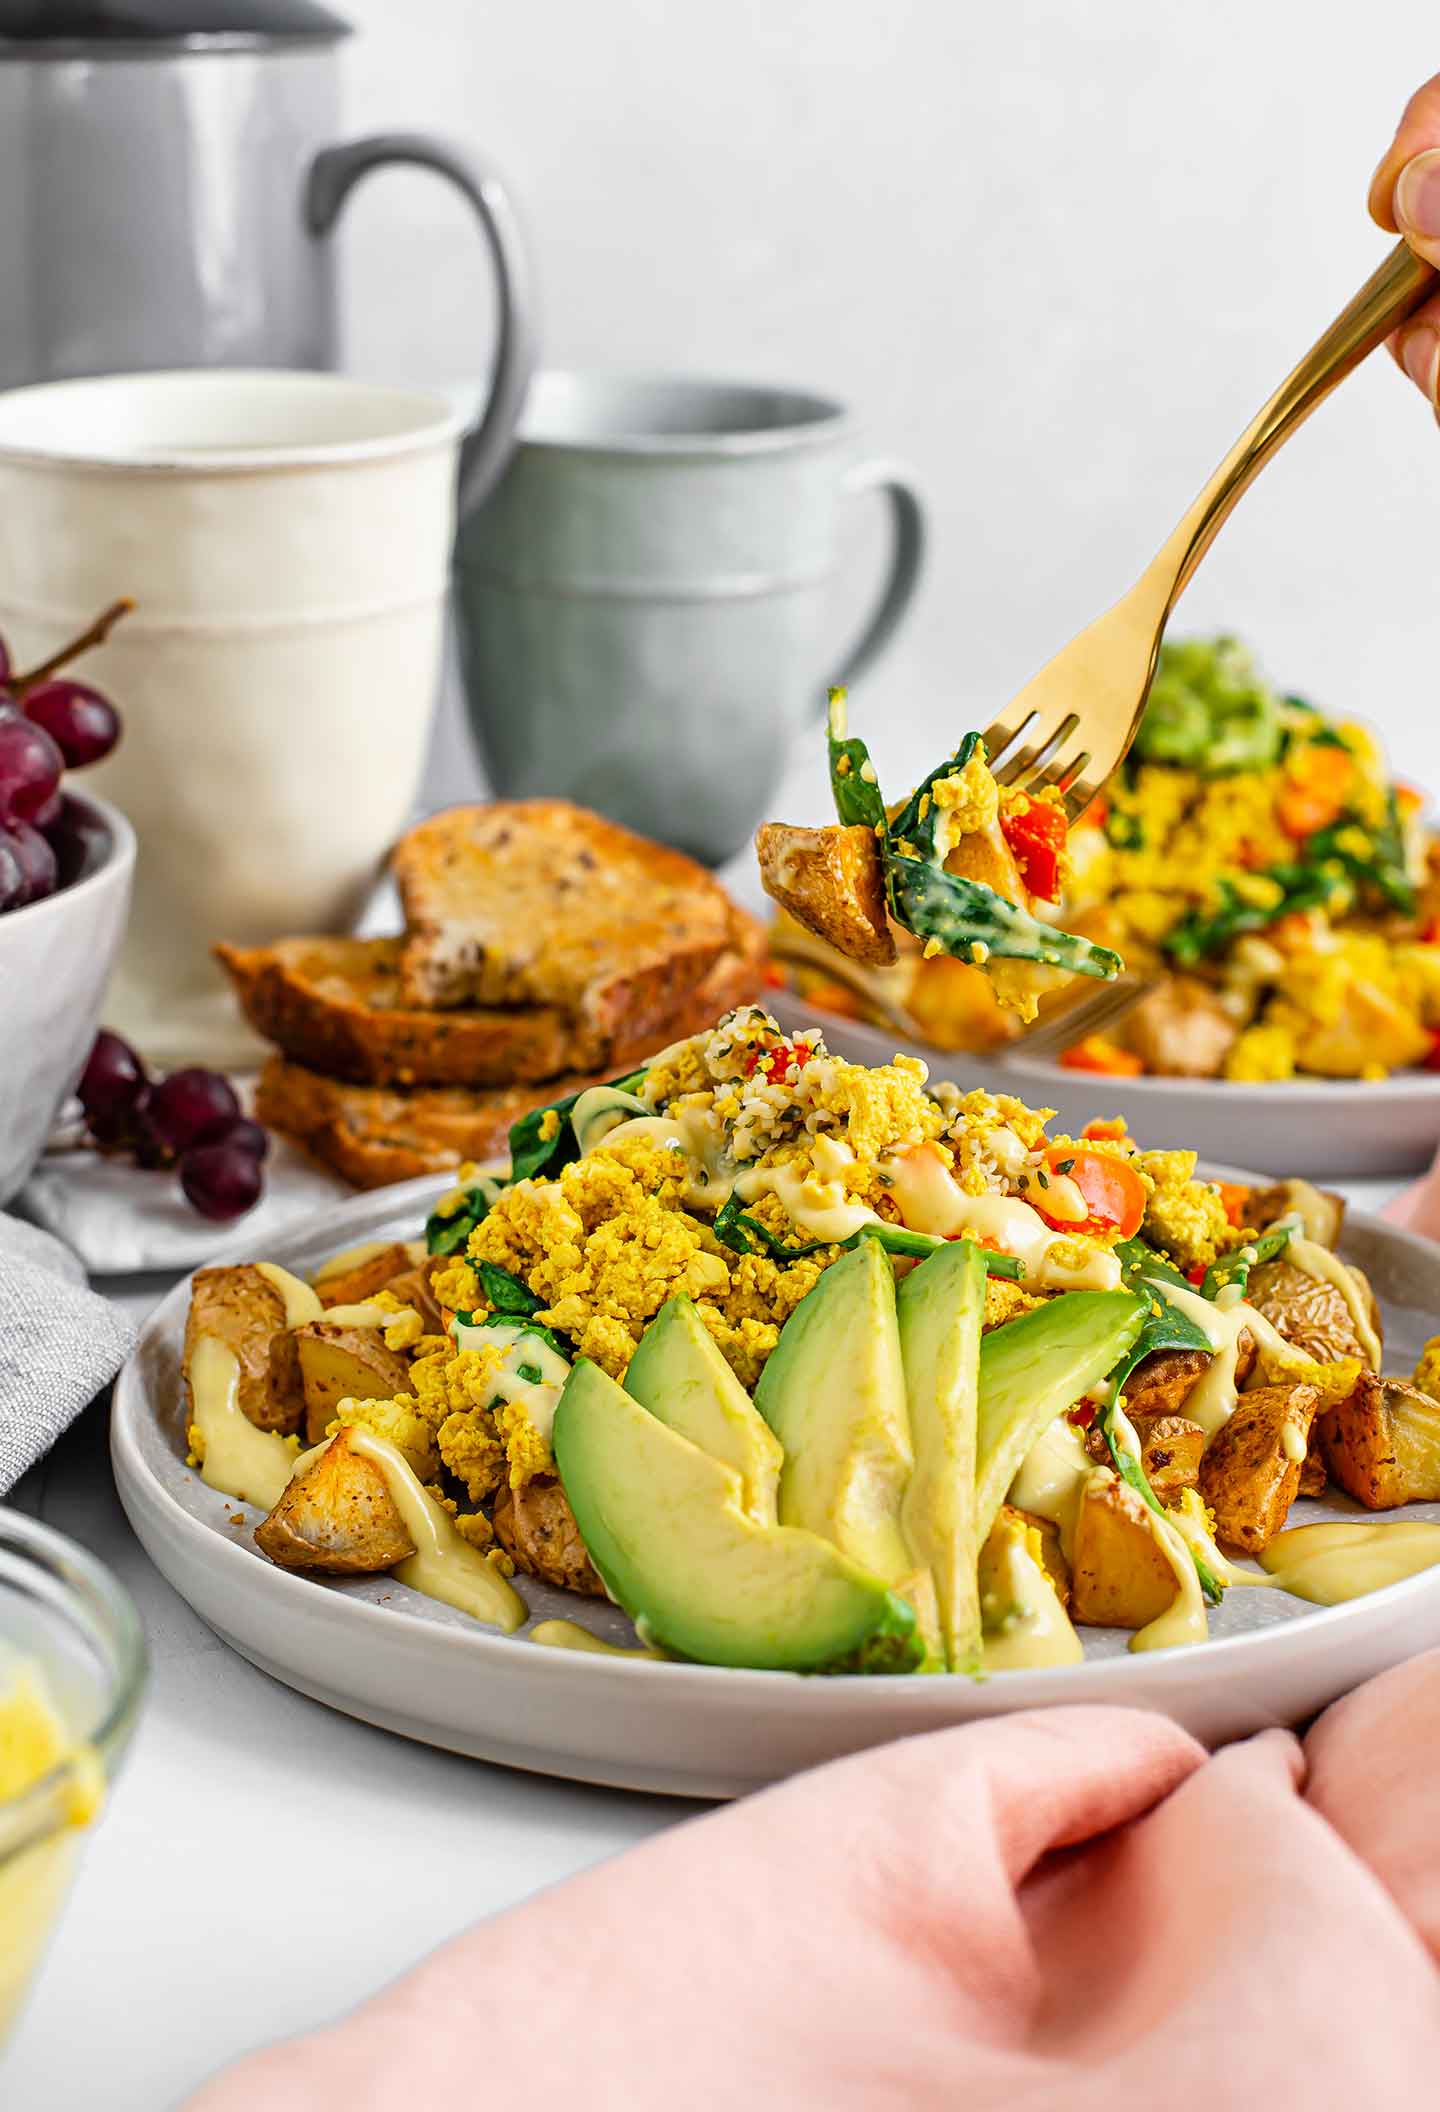 Side view of ultimate scramble and spuds breakfast bowl with sliced avocado and drizzled queso. Toast, grapes, coffee, and another scramble bowl are in the background.